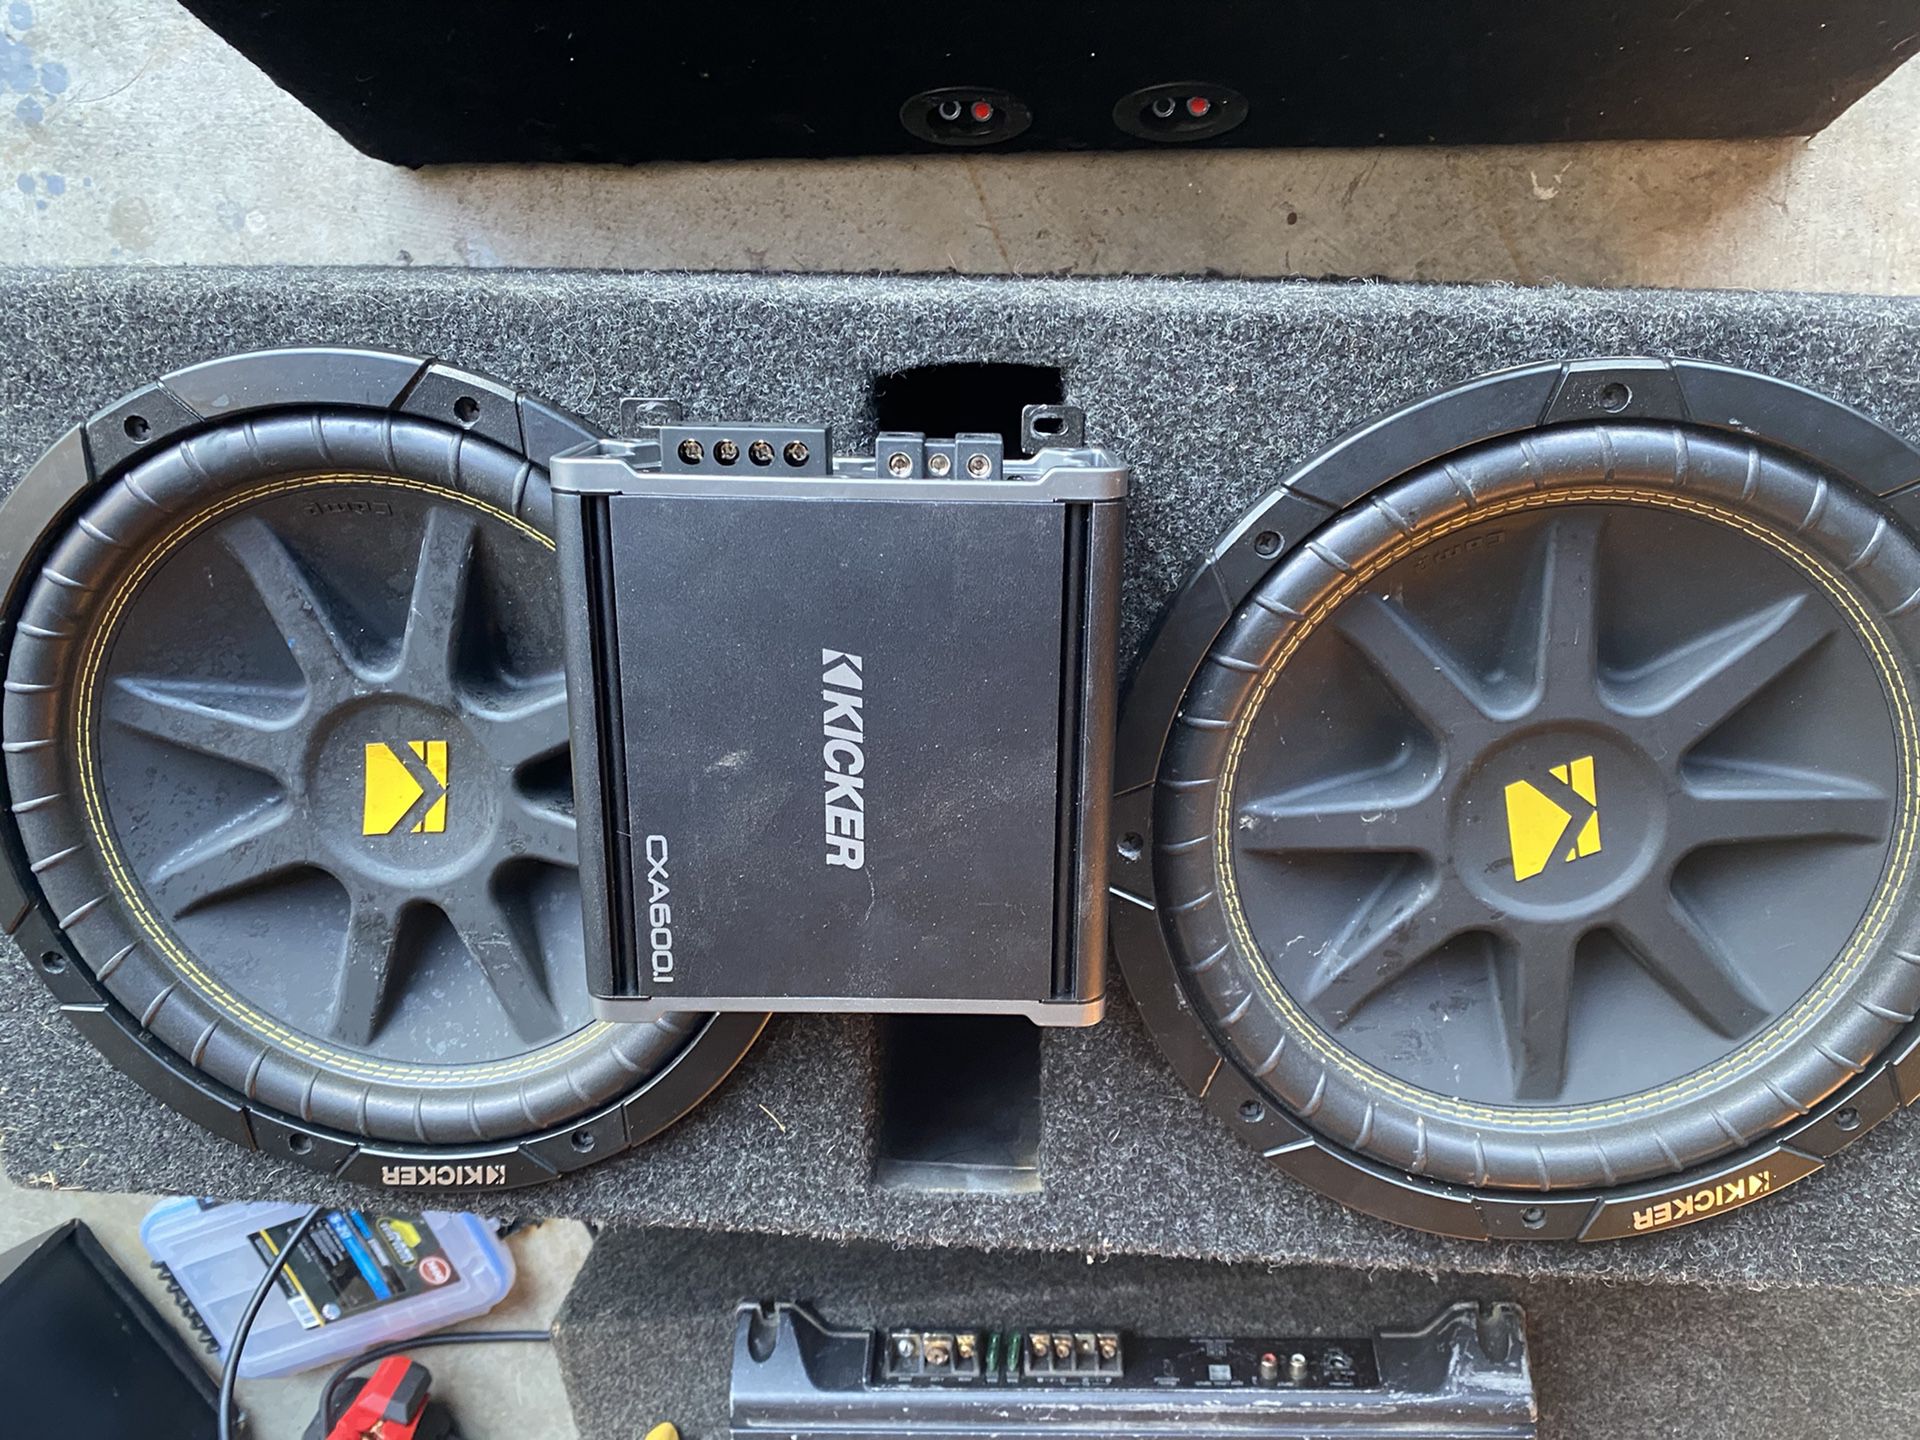 12s kickers come with kicker amp